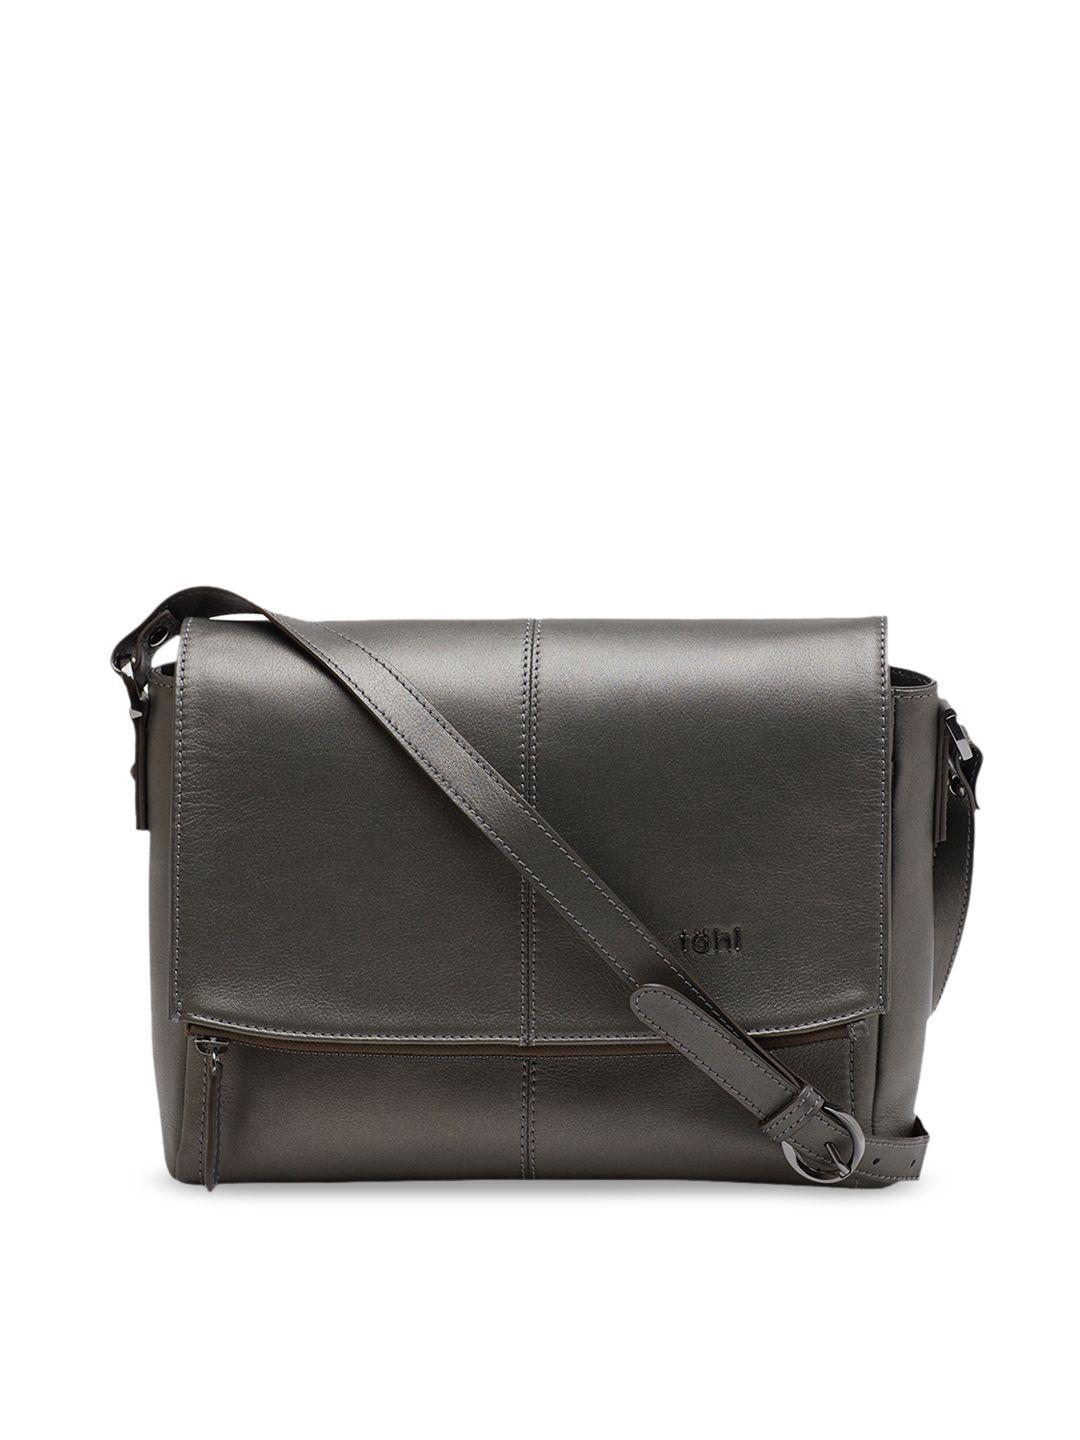 tohl grey solid leather sling bag